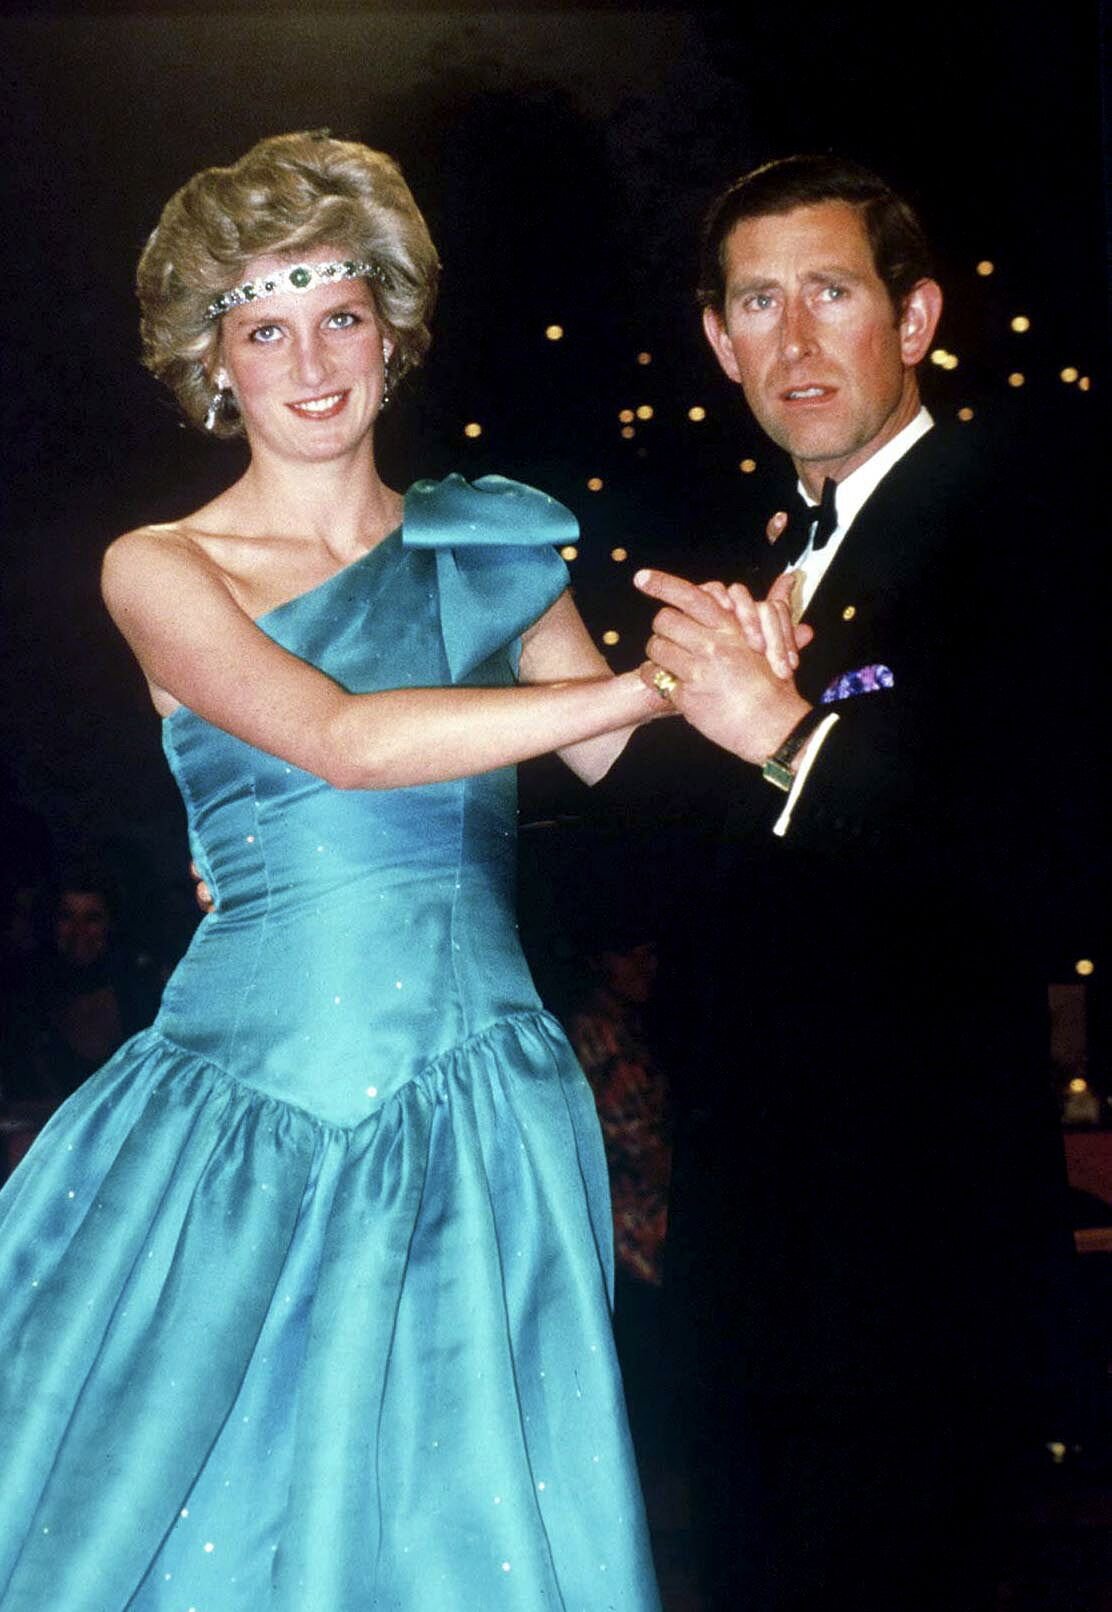 Prince Charles and Princess Diana's Relationship in 14 Quick Facts